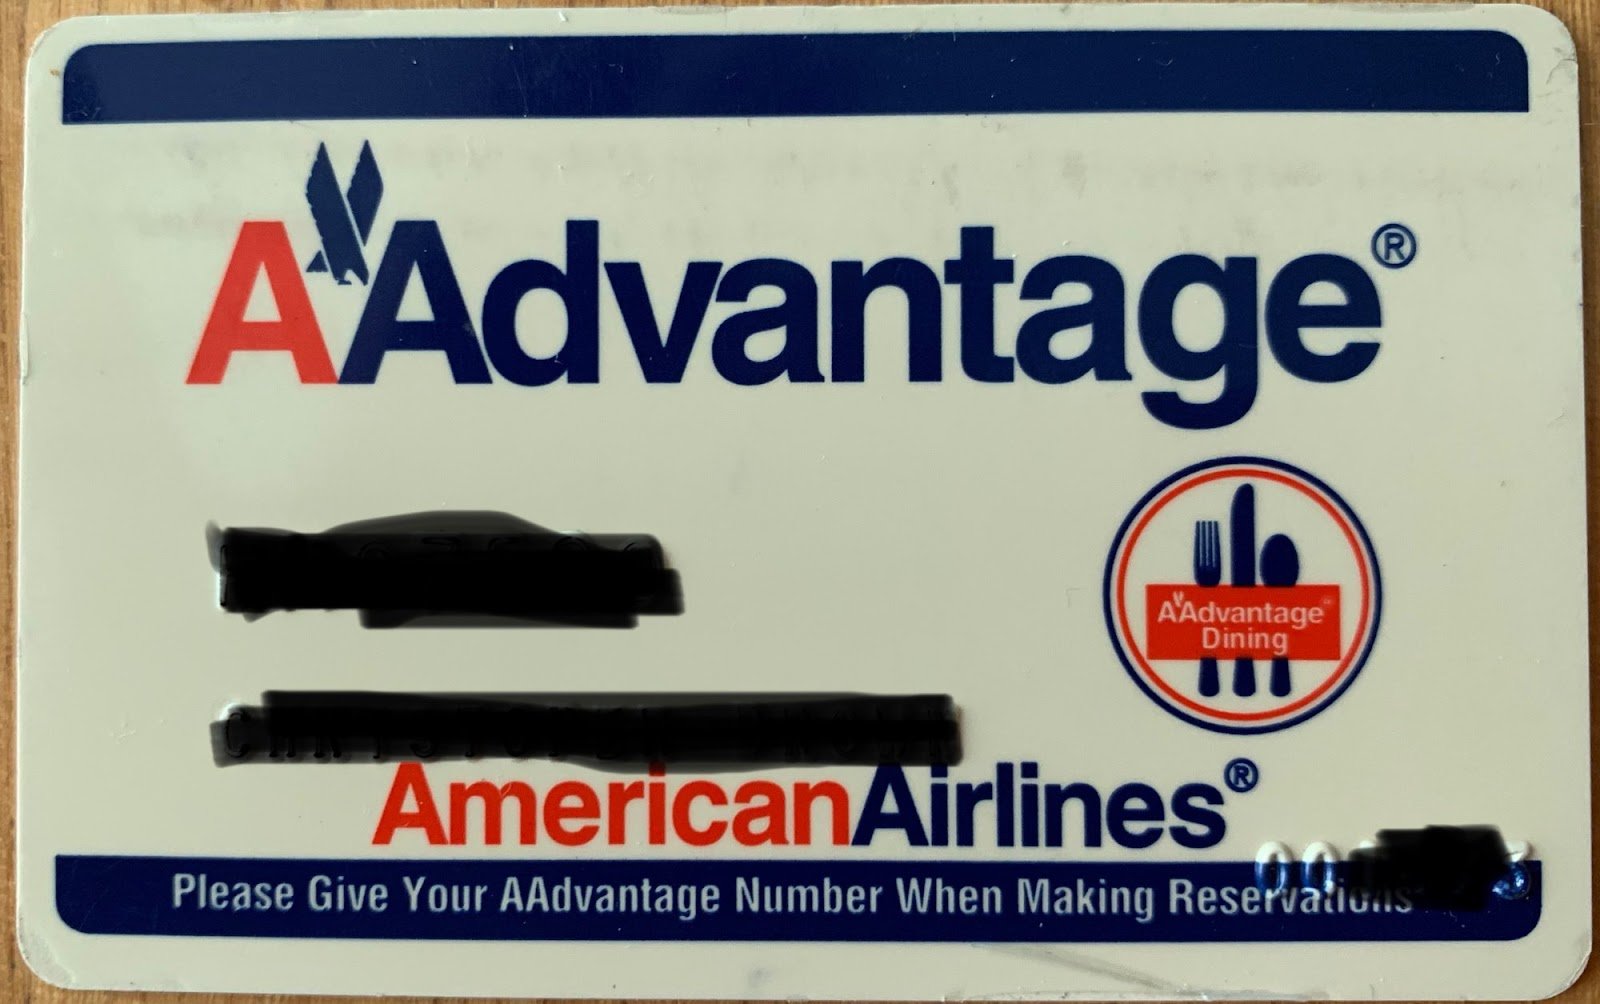 May 1981: American Airlines launches loyalty program